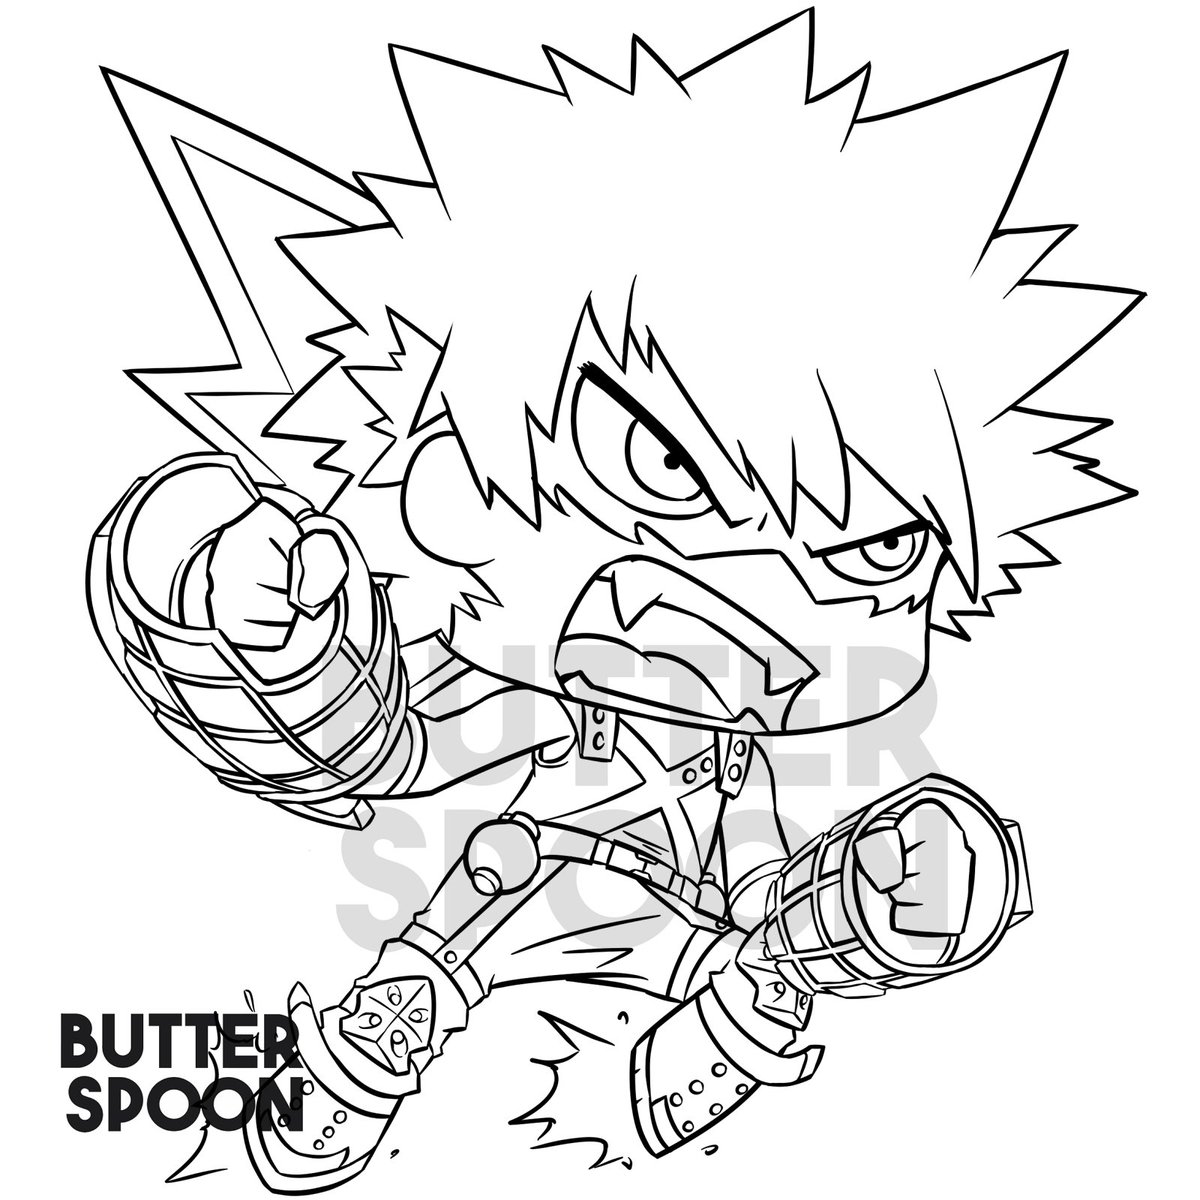 Butterspoon@Commission Open on Twitter: 